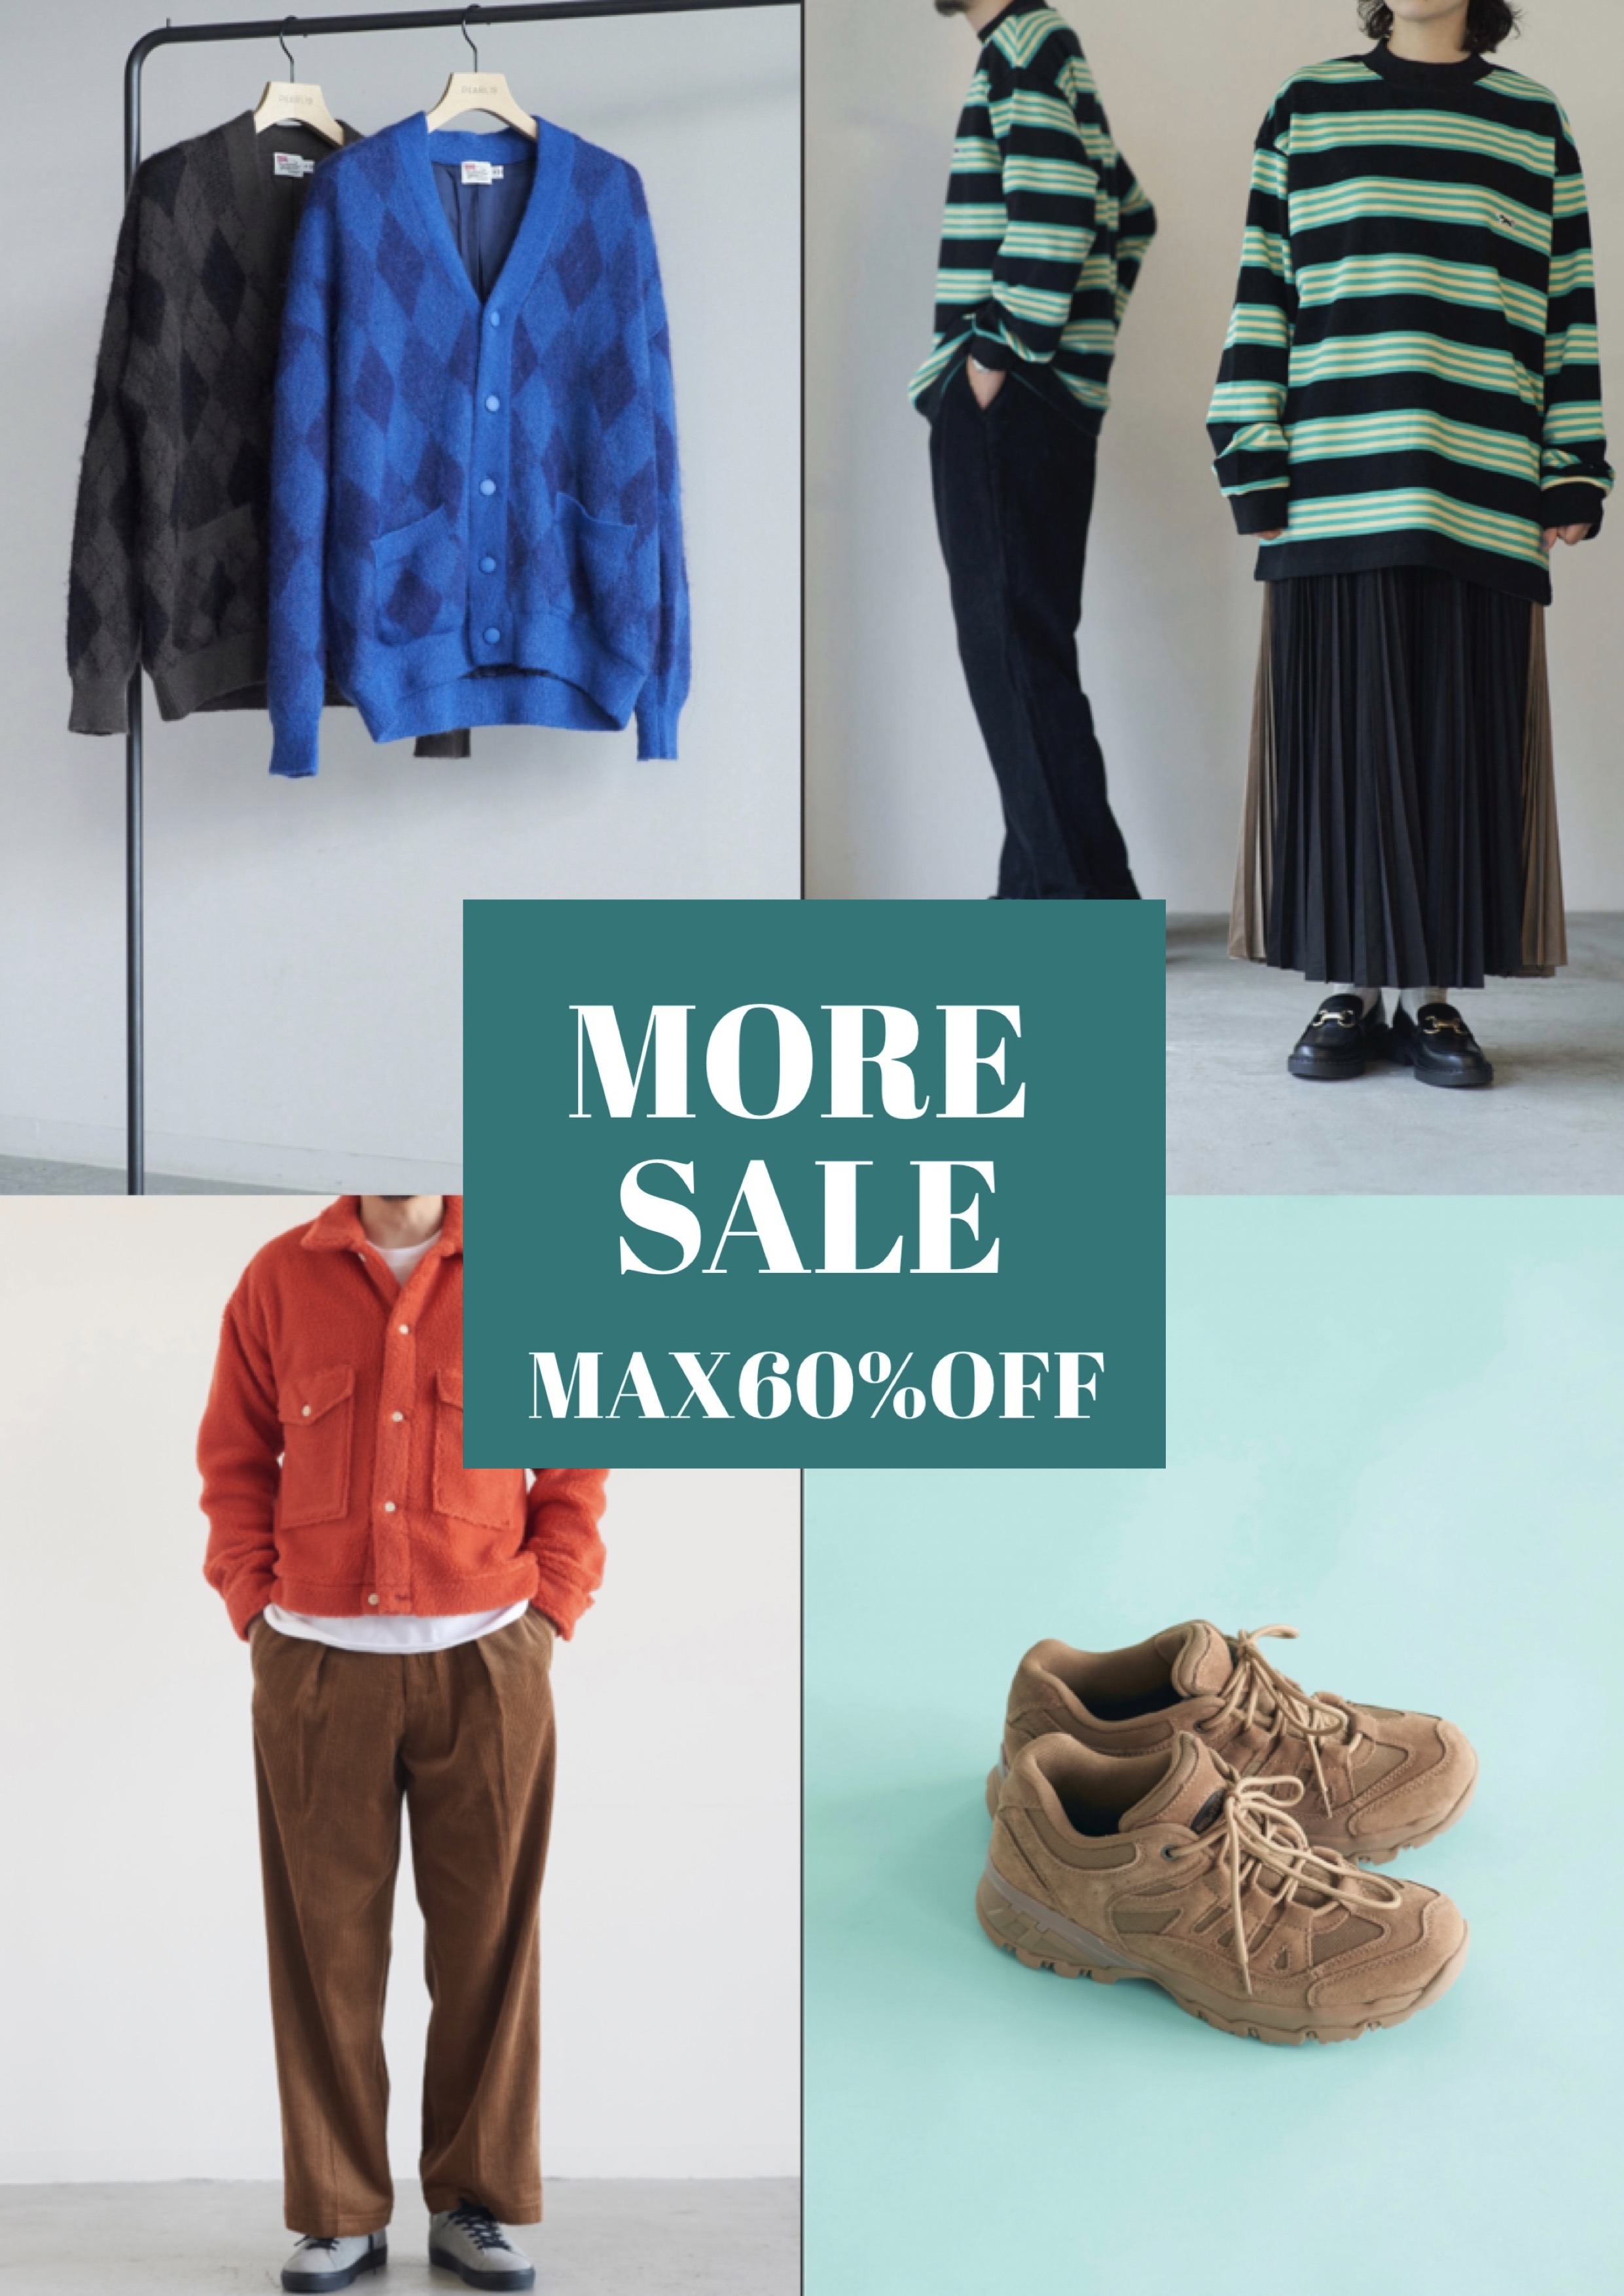 MAX60％OFF『MORE SALE』開催のお知らせ